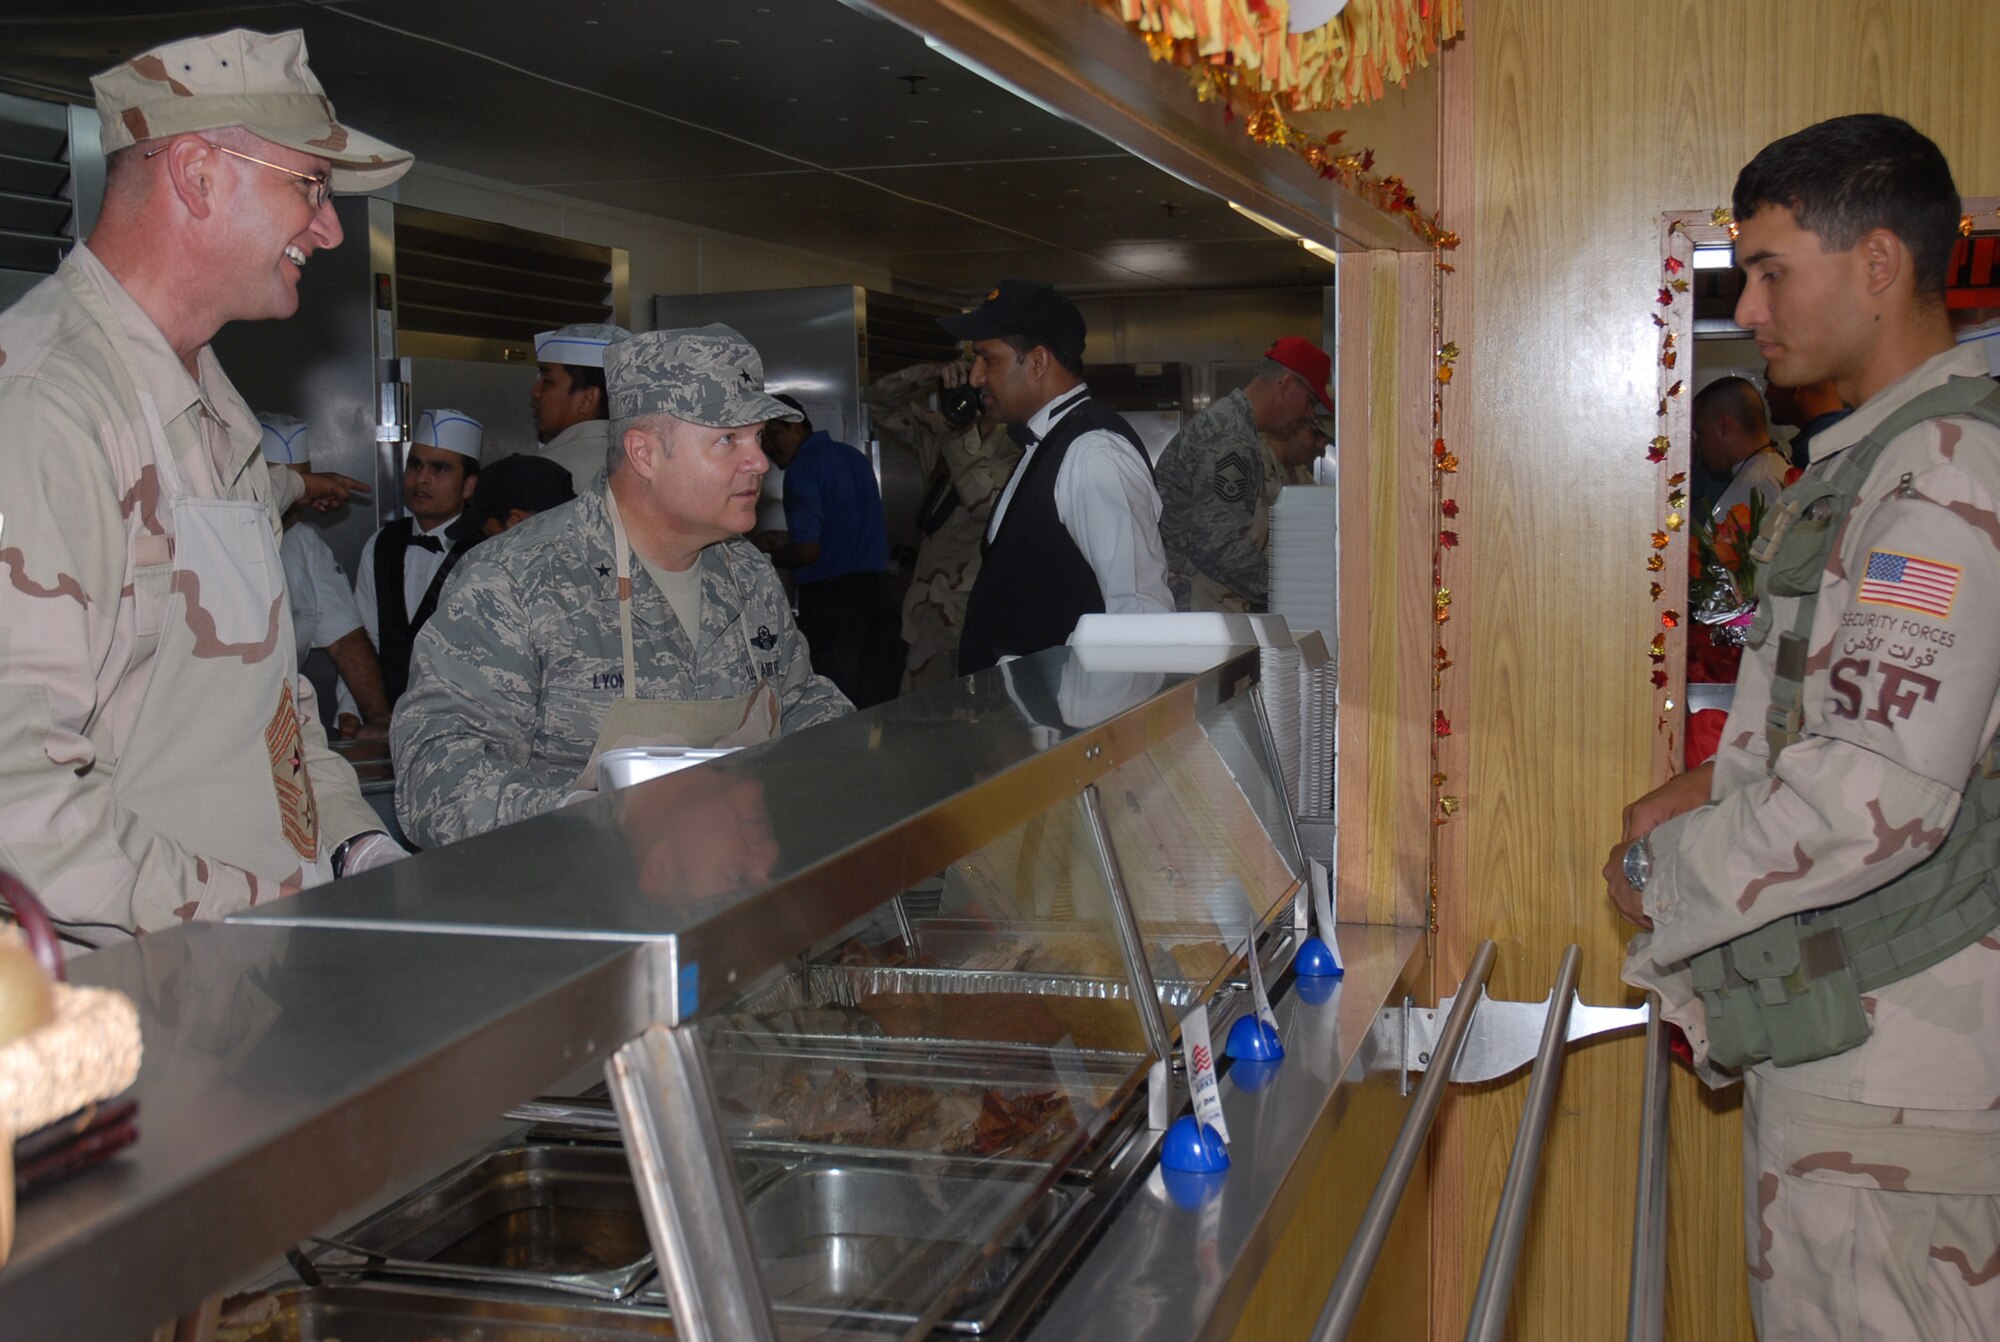 SOUTHWEST ASIA - Chief Master Sgt. Lloyd Hollen (left), 379th Air Expeditionary Wing command chief, and Brig. Gen. Charlie Lyon, 379th AEW commander, serve Thanksgiving dinner to Senior Airman Carlos Solorzano, 379th Expeditionary Security Forces Squadron, at the Independence Dining Facility Nov. 22 at a Southwest Asia air base. Airman Solorzano is deployed from Aviano Air Base, Italy. His hometown is Santa Clarita, Calif. (U. S. Air Force photo/Staff Sgt. Douglas Olsen)